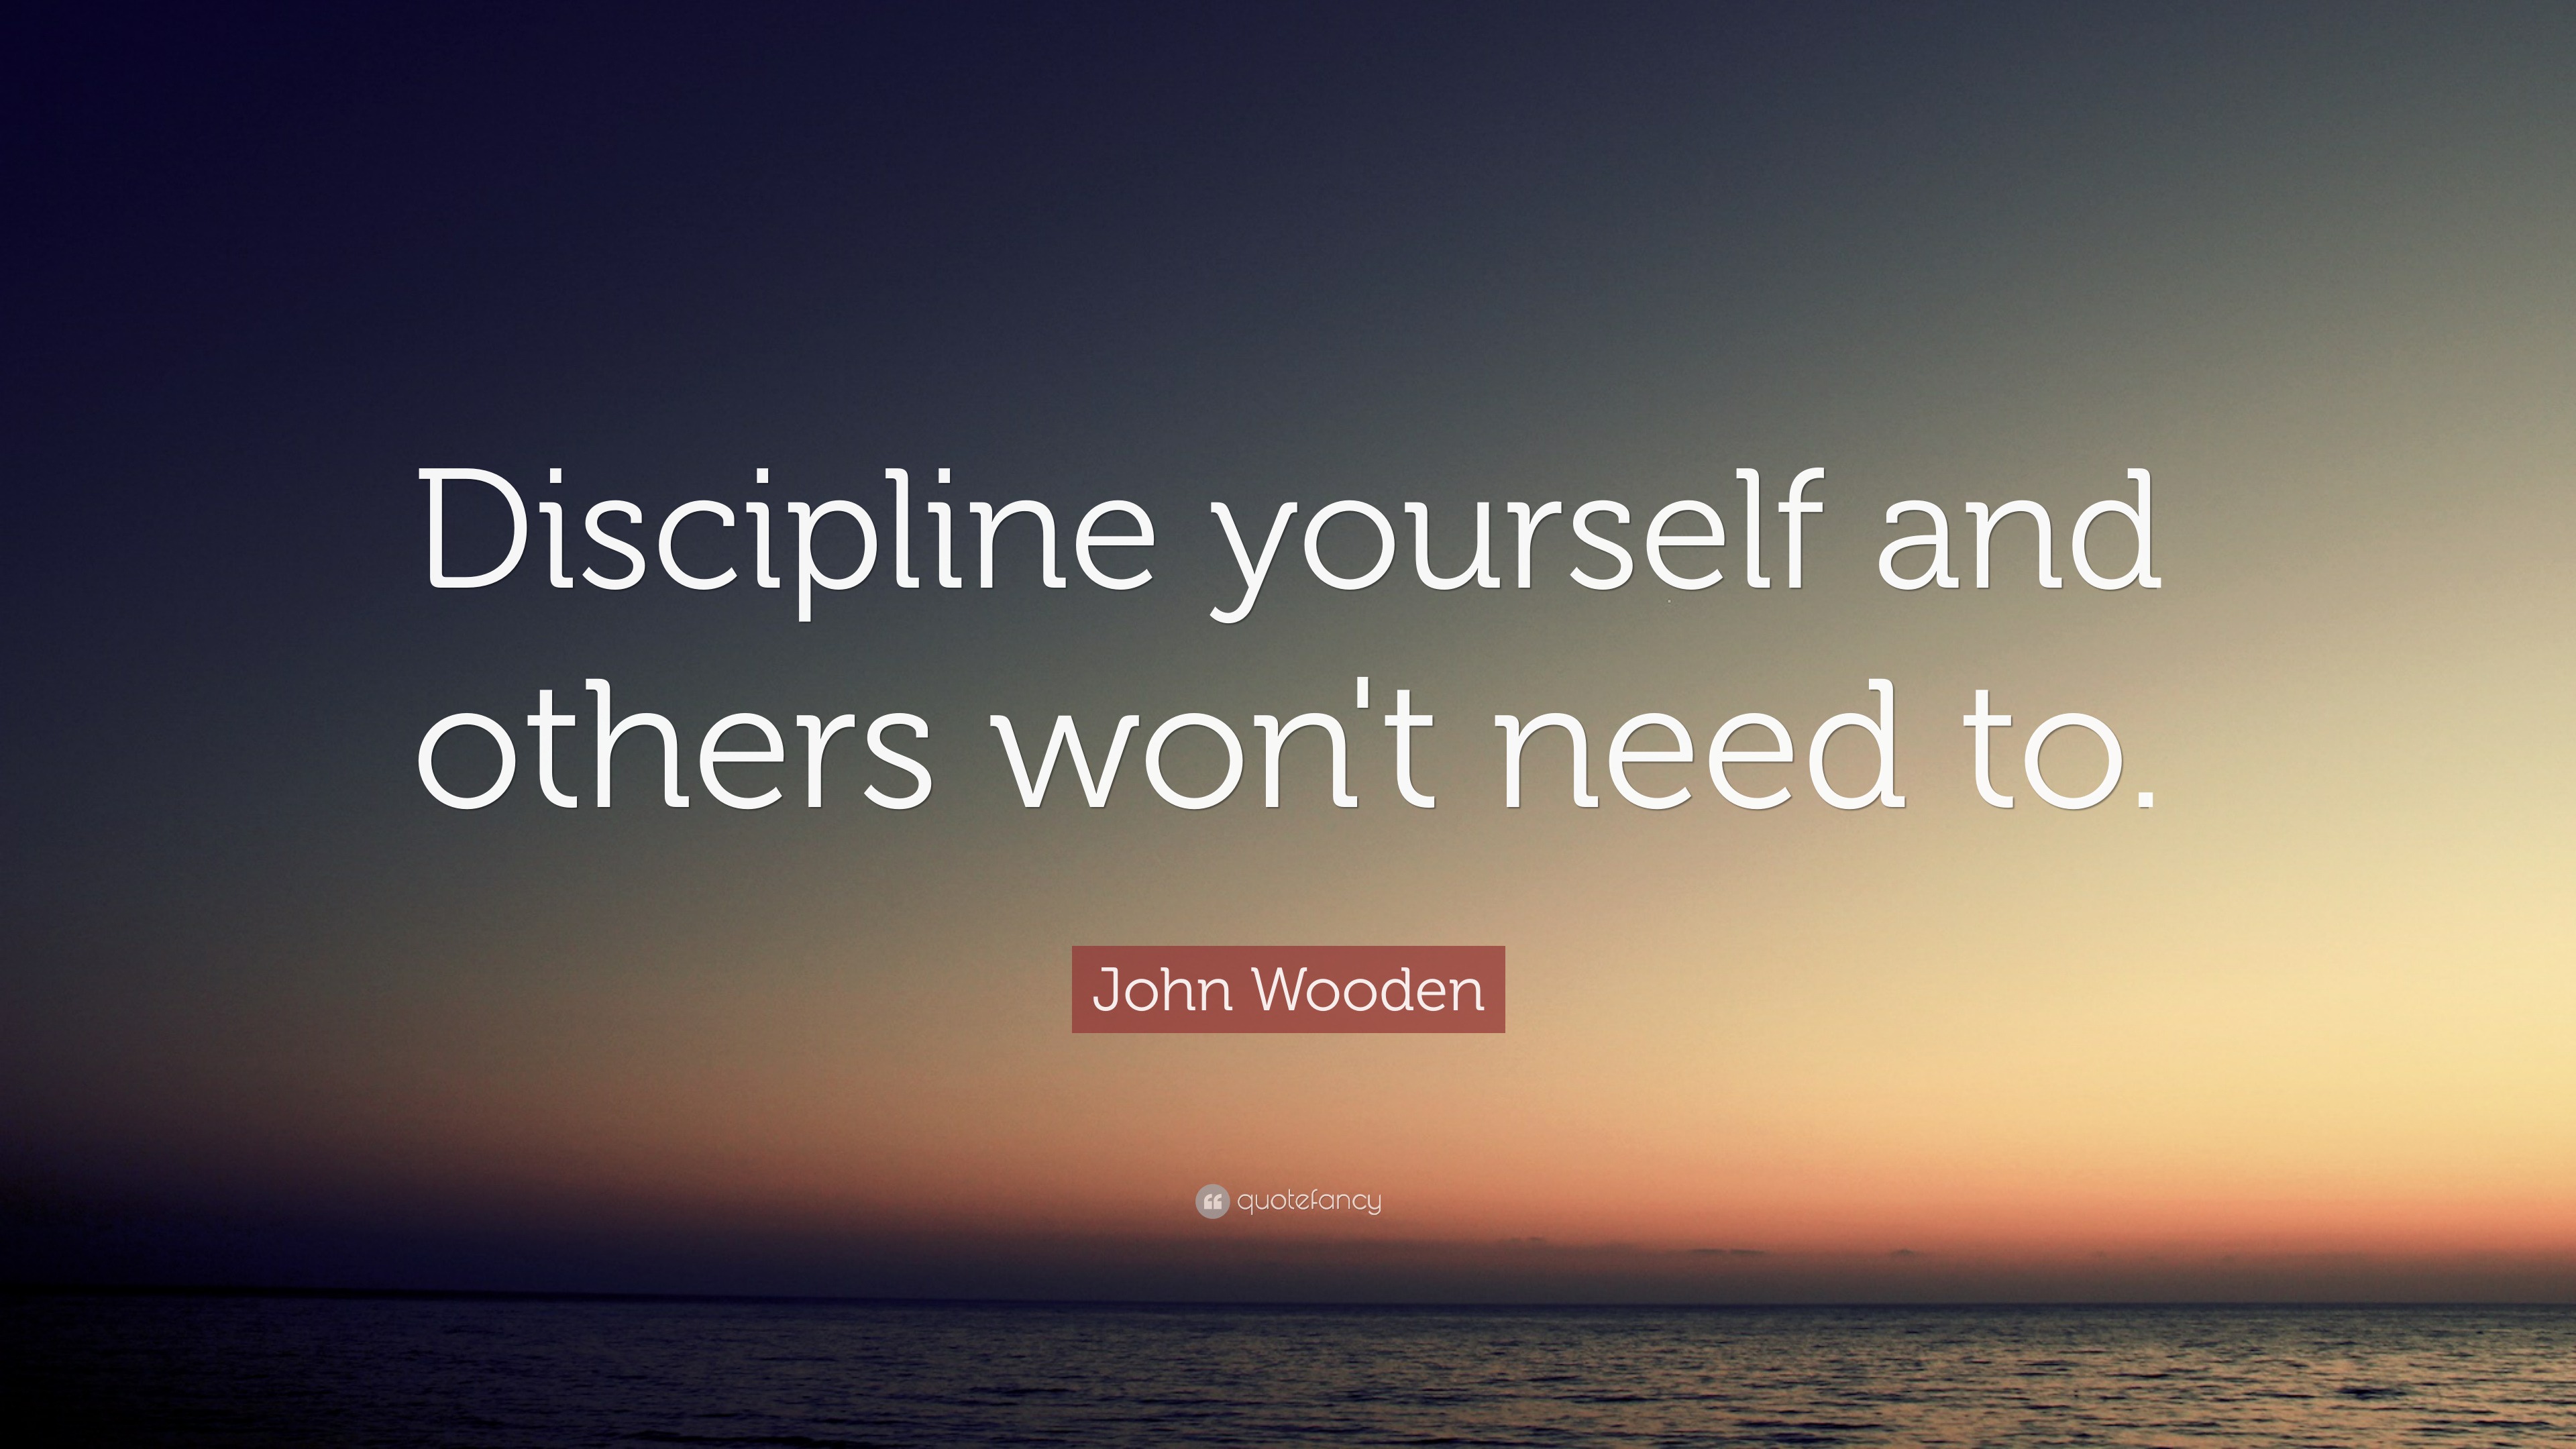 John Wooden Quote: “Discipline yourself and others won't need to.”